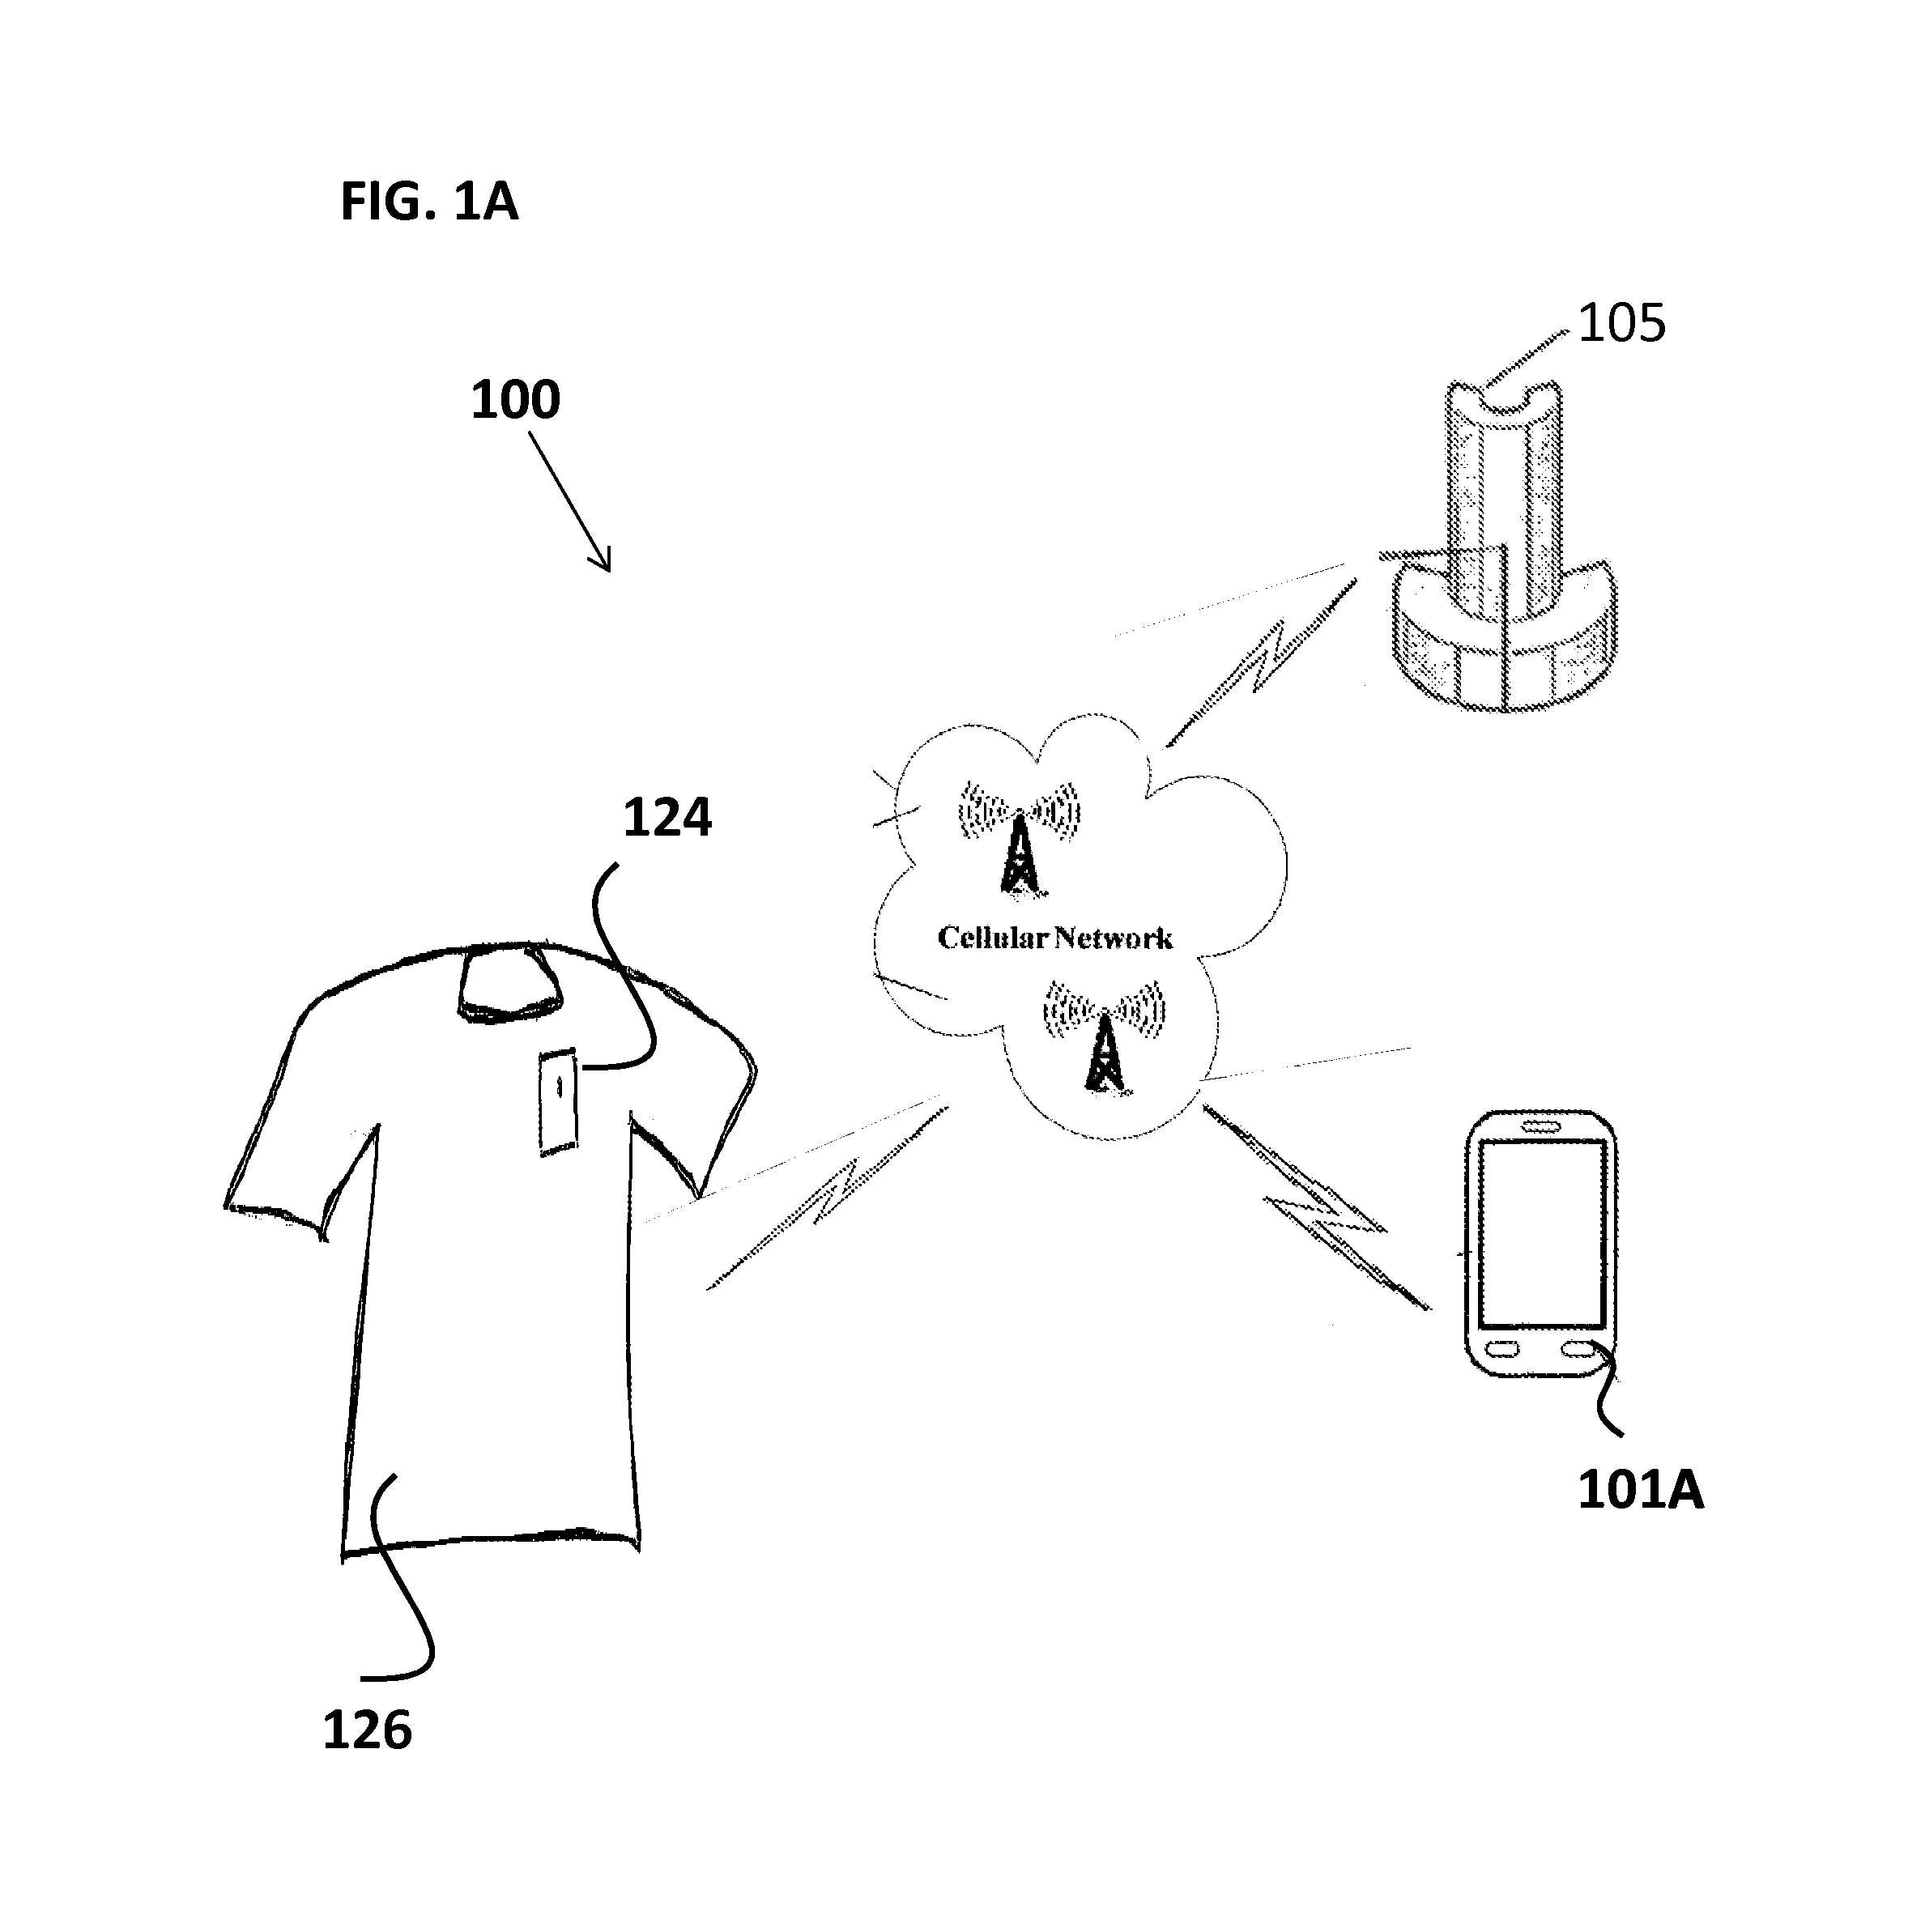 Systems and methods for performing user recognition based on biometric information captured with wearable electronic devices